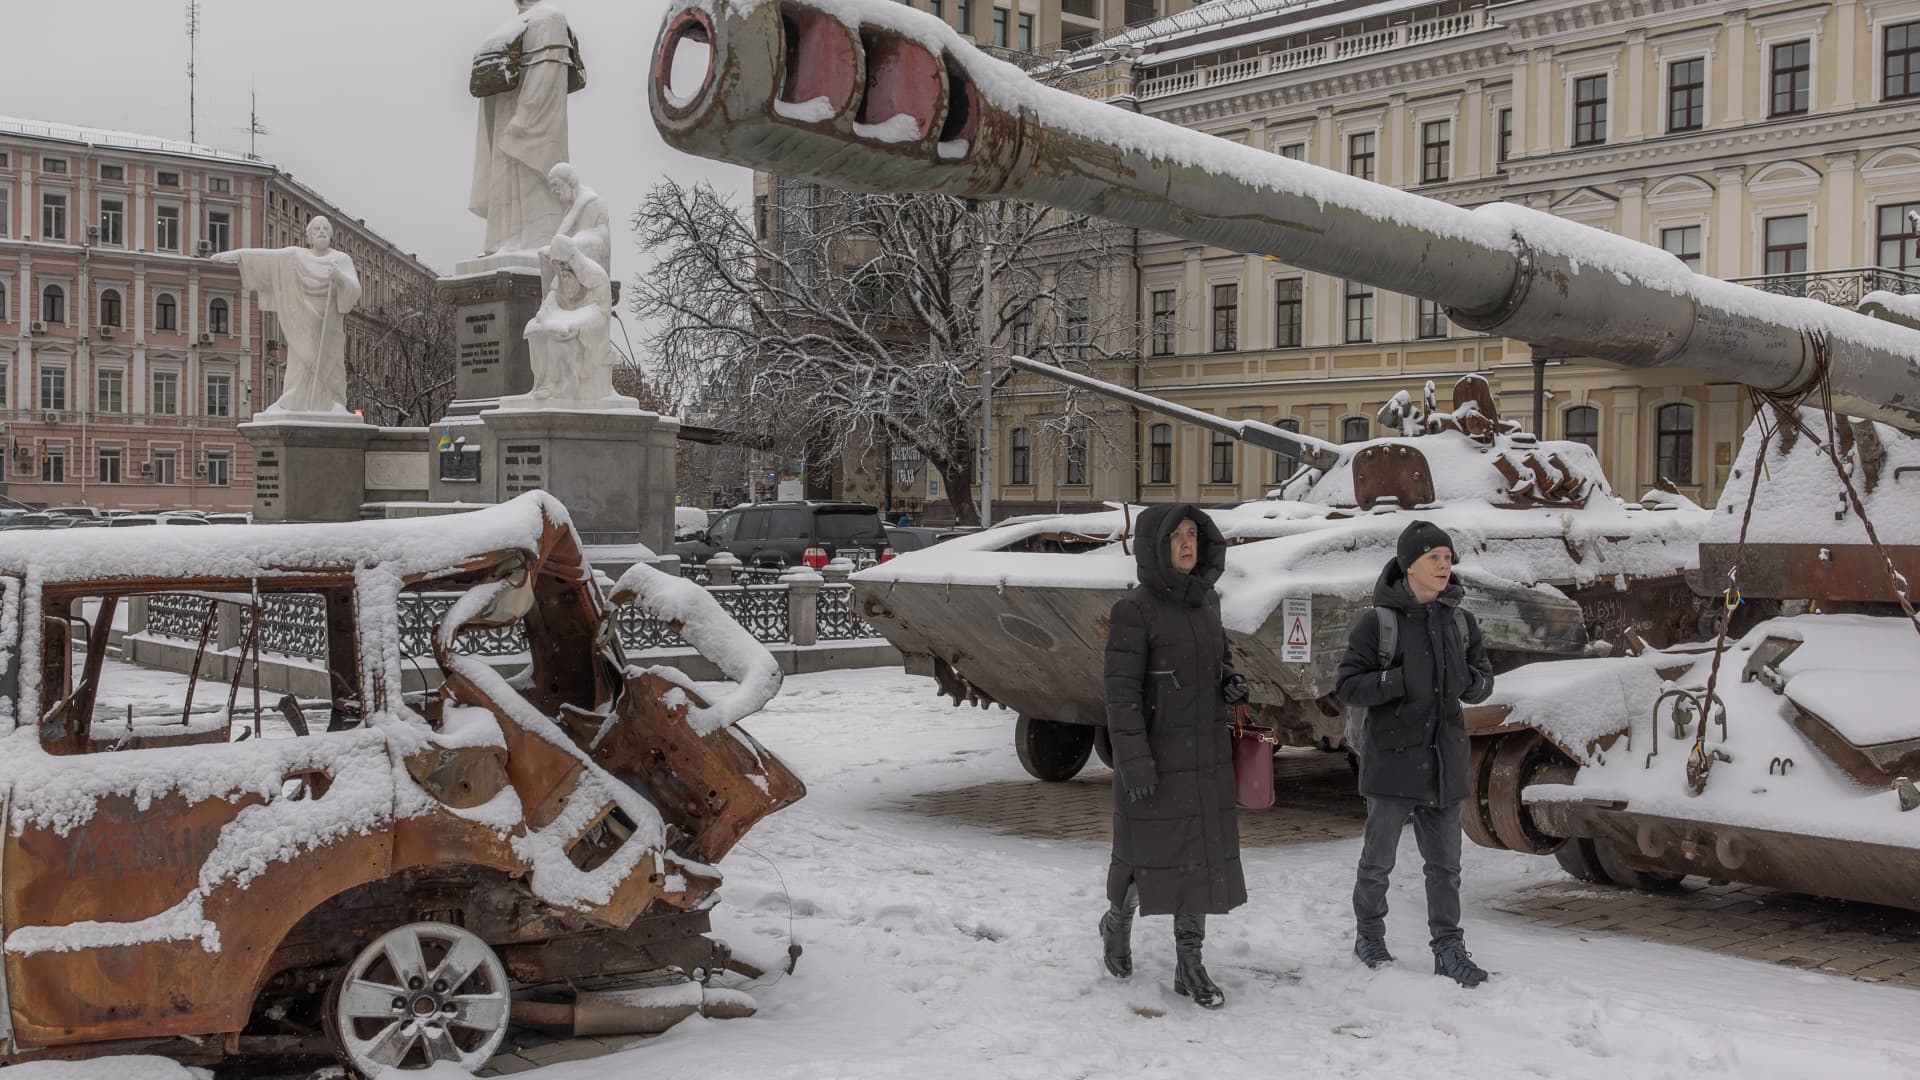 Pedestrians walks past destroyed Russian military vehicles blanketed in snow in front of Saint Michael's Golden-Domed Monastery, in downtown Kyiv, on November 22, 2023.